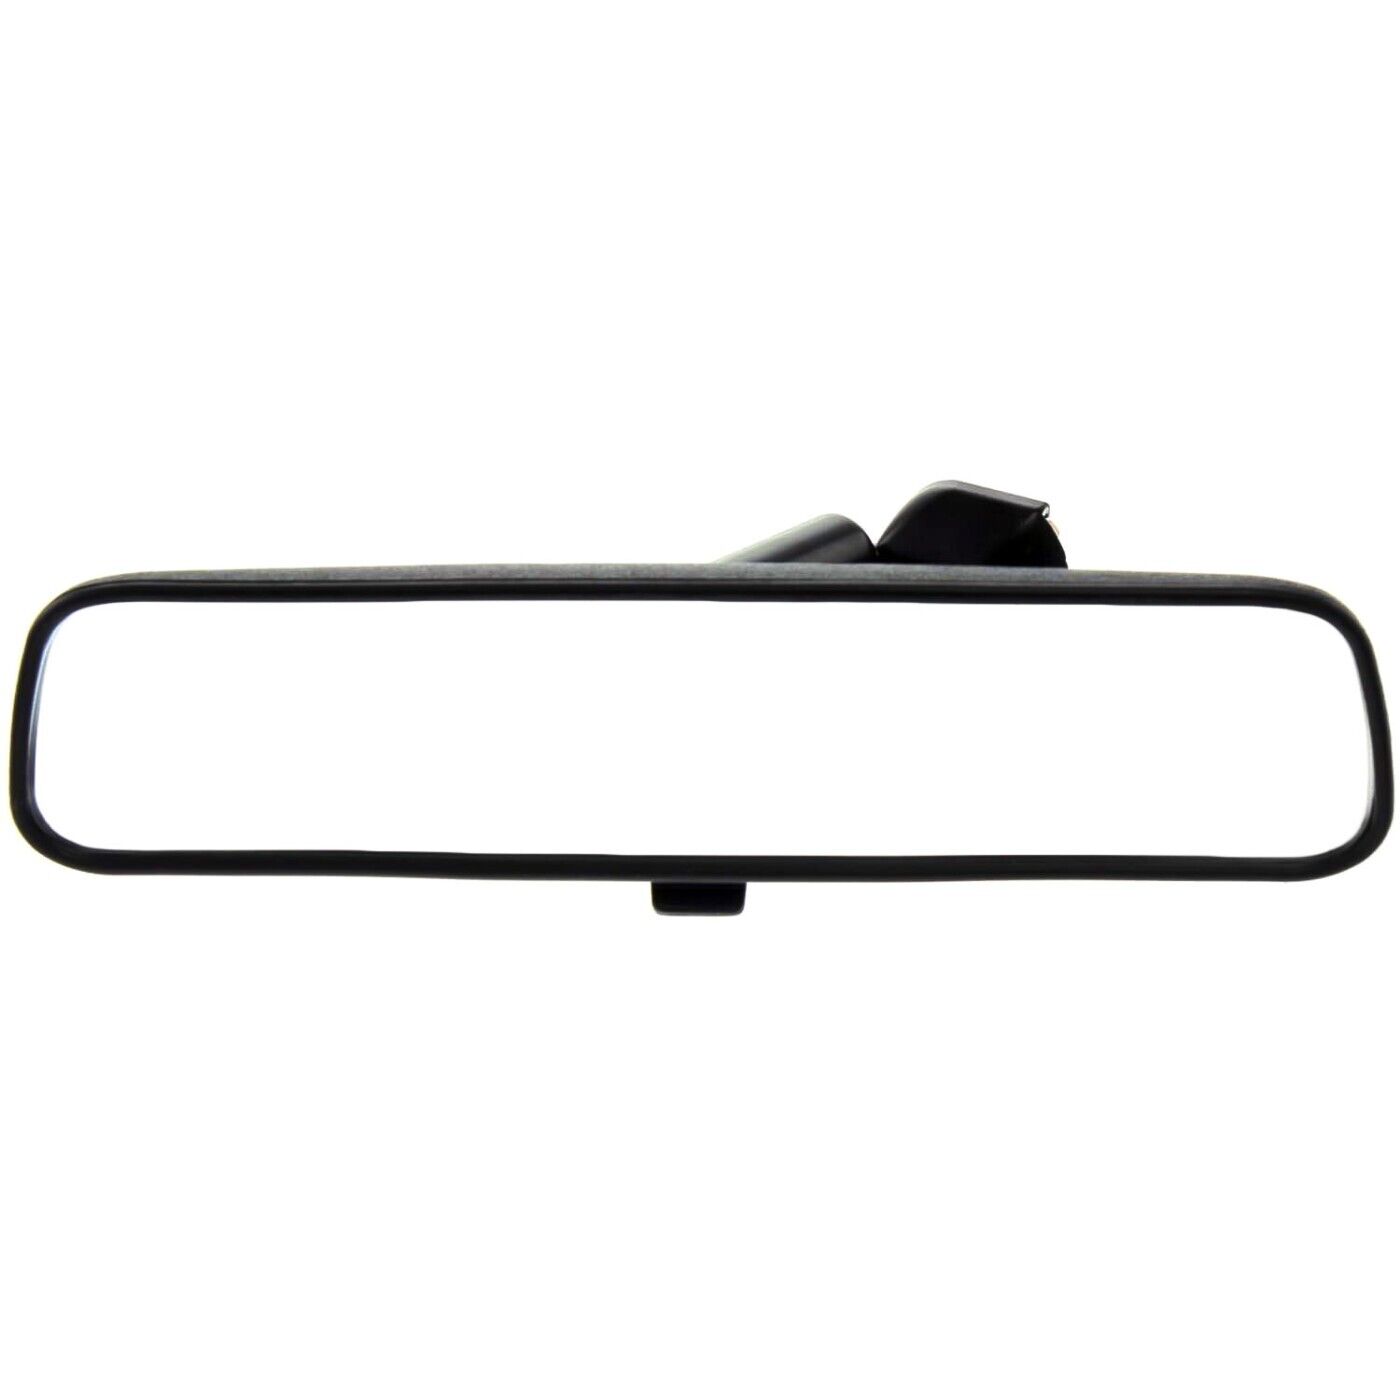 Universal Inner Inside Interior 10 Inch Rearview Rear View Mirror